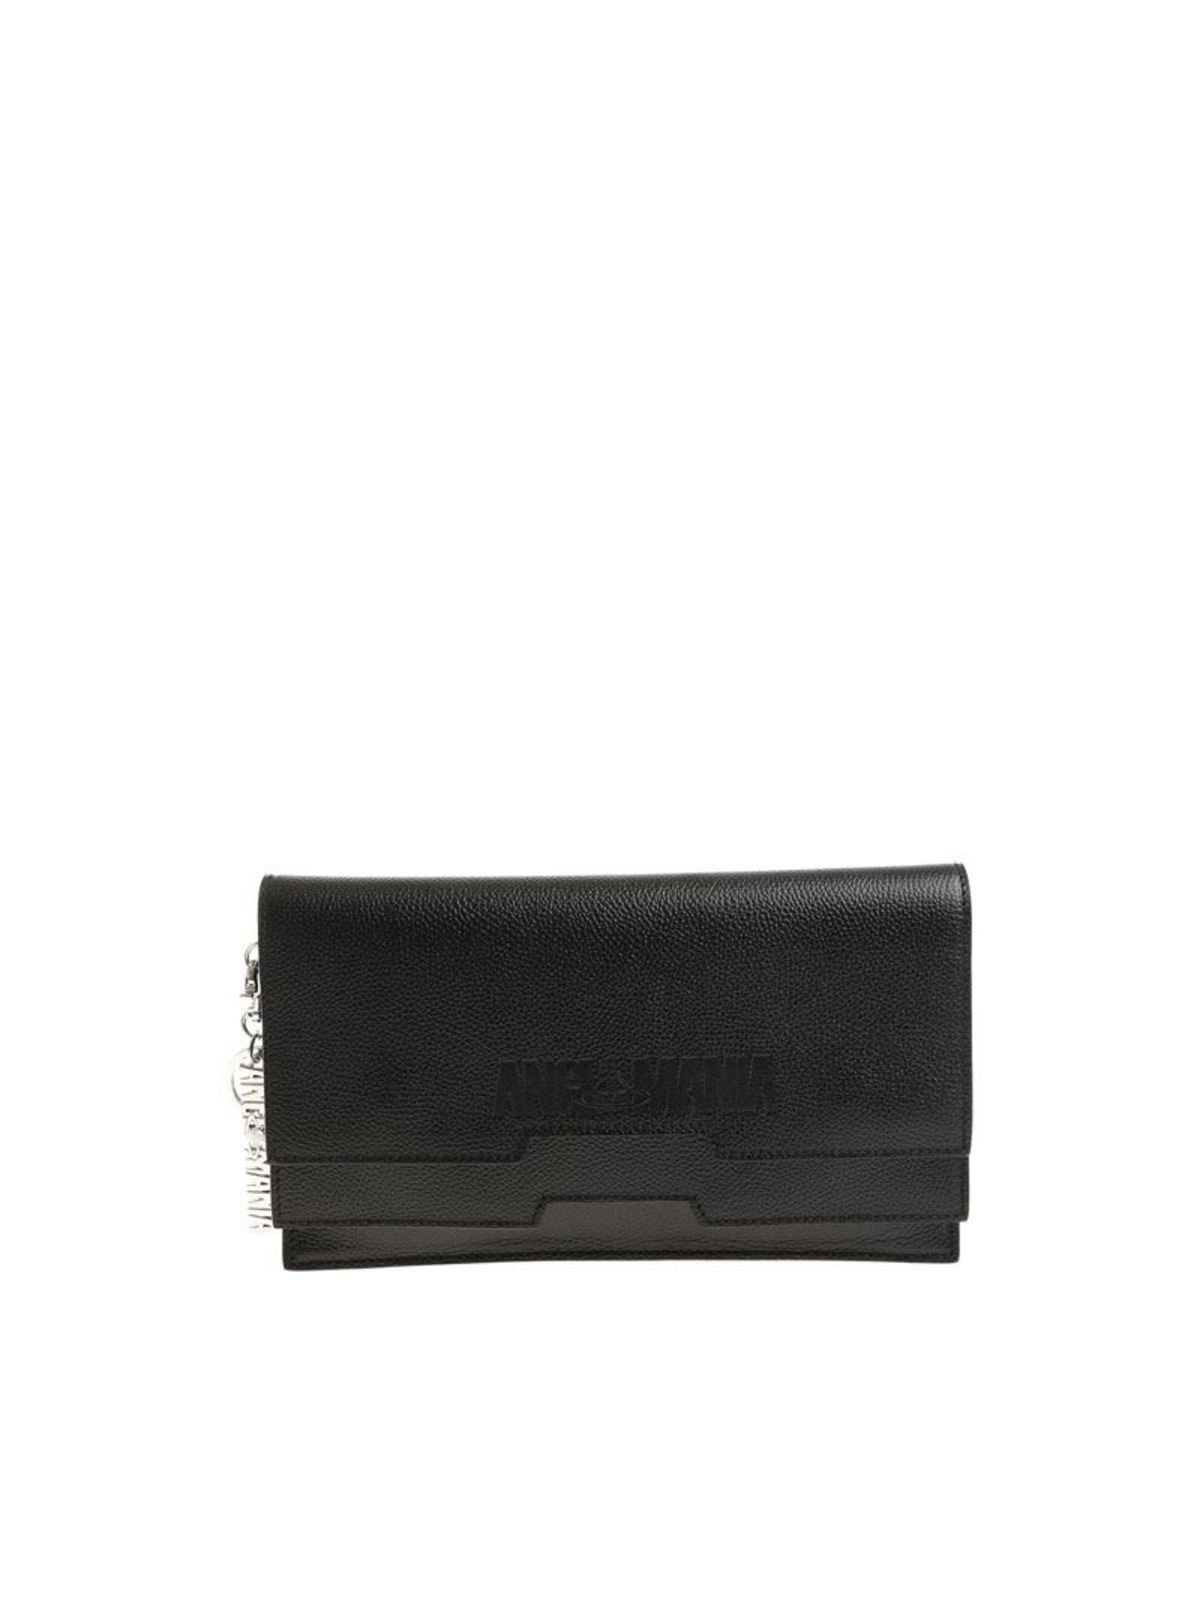 VIVIENNE WESTWOOD ANGLOMANIA HAMMERED LEATHER CLUTCH